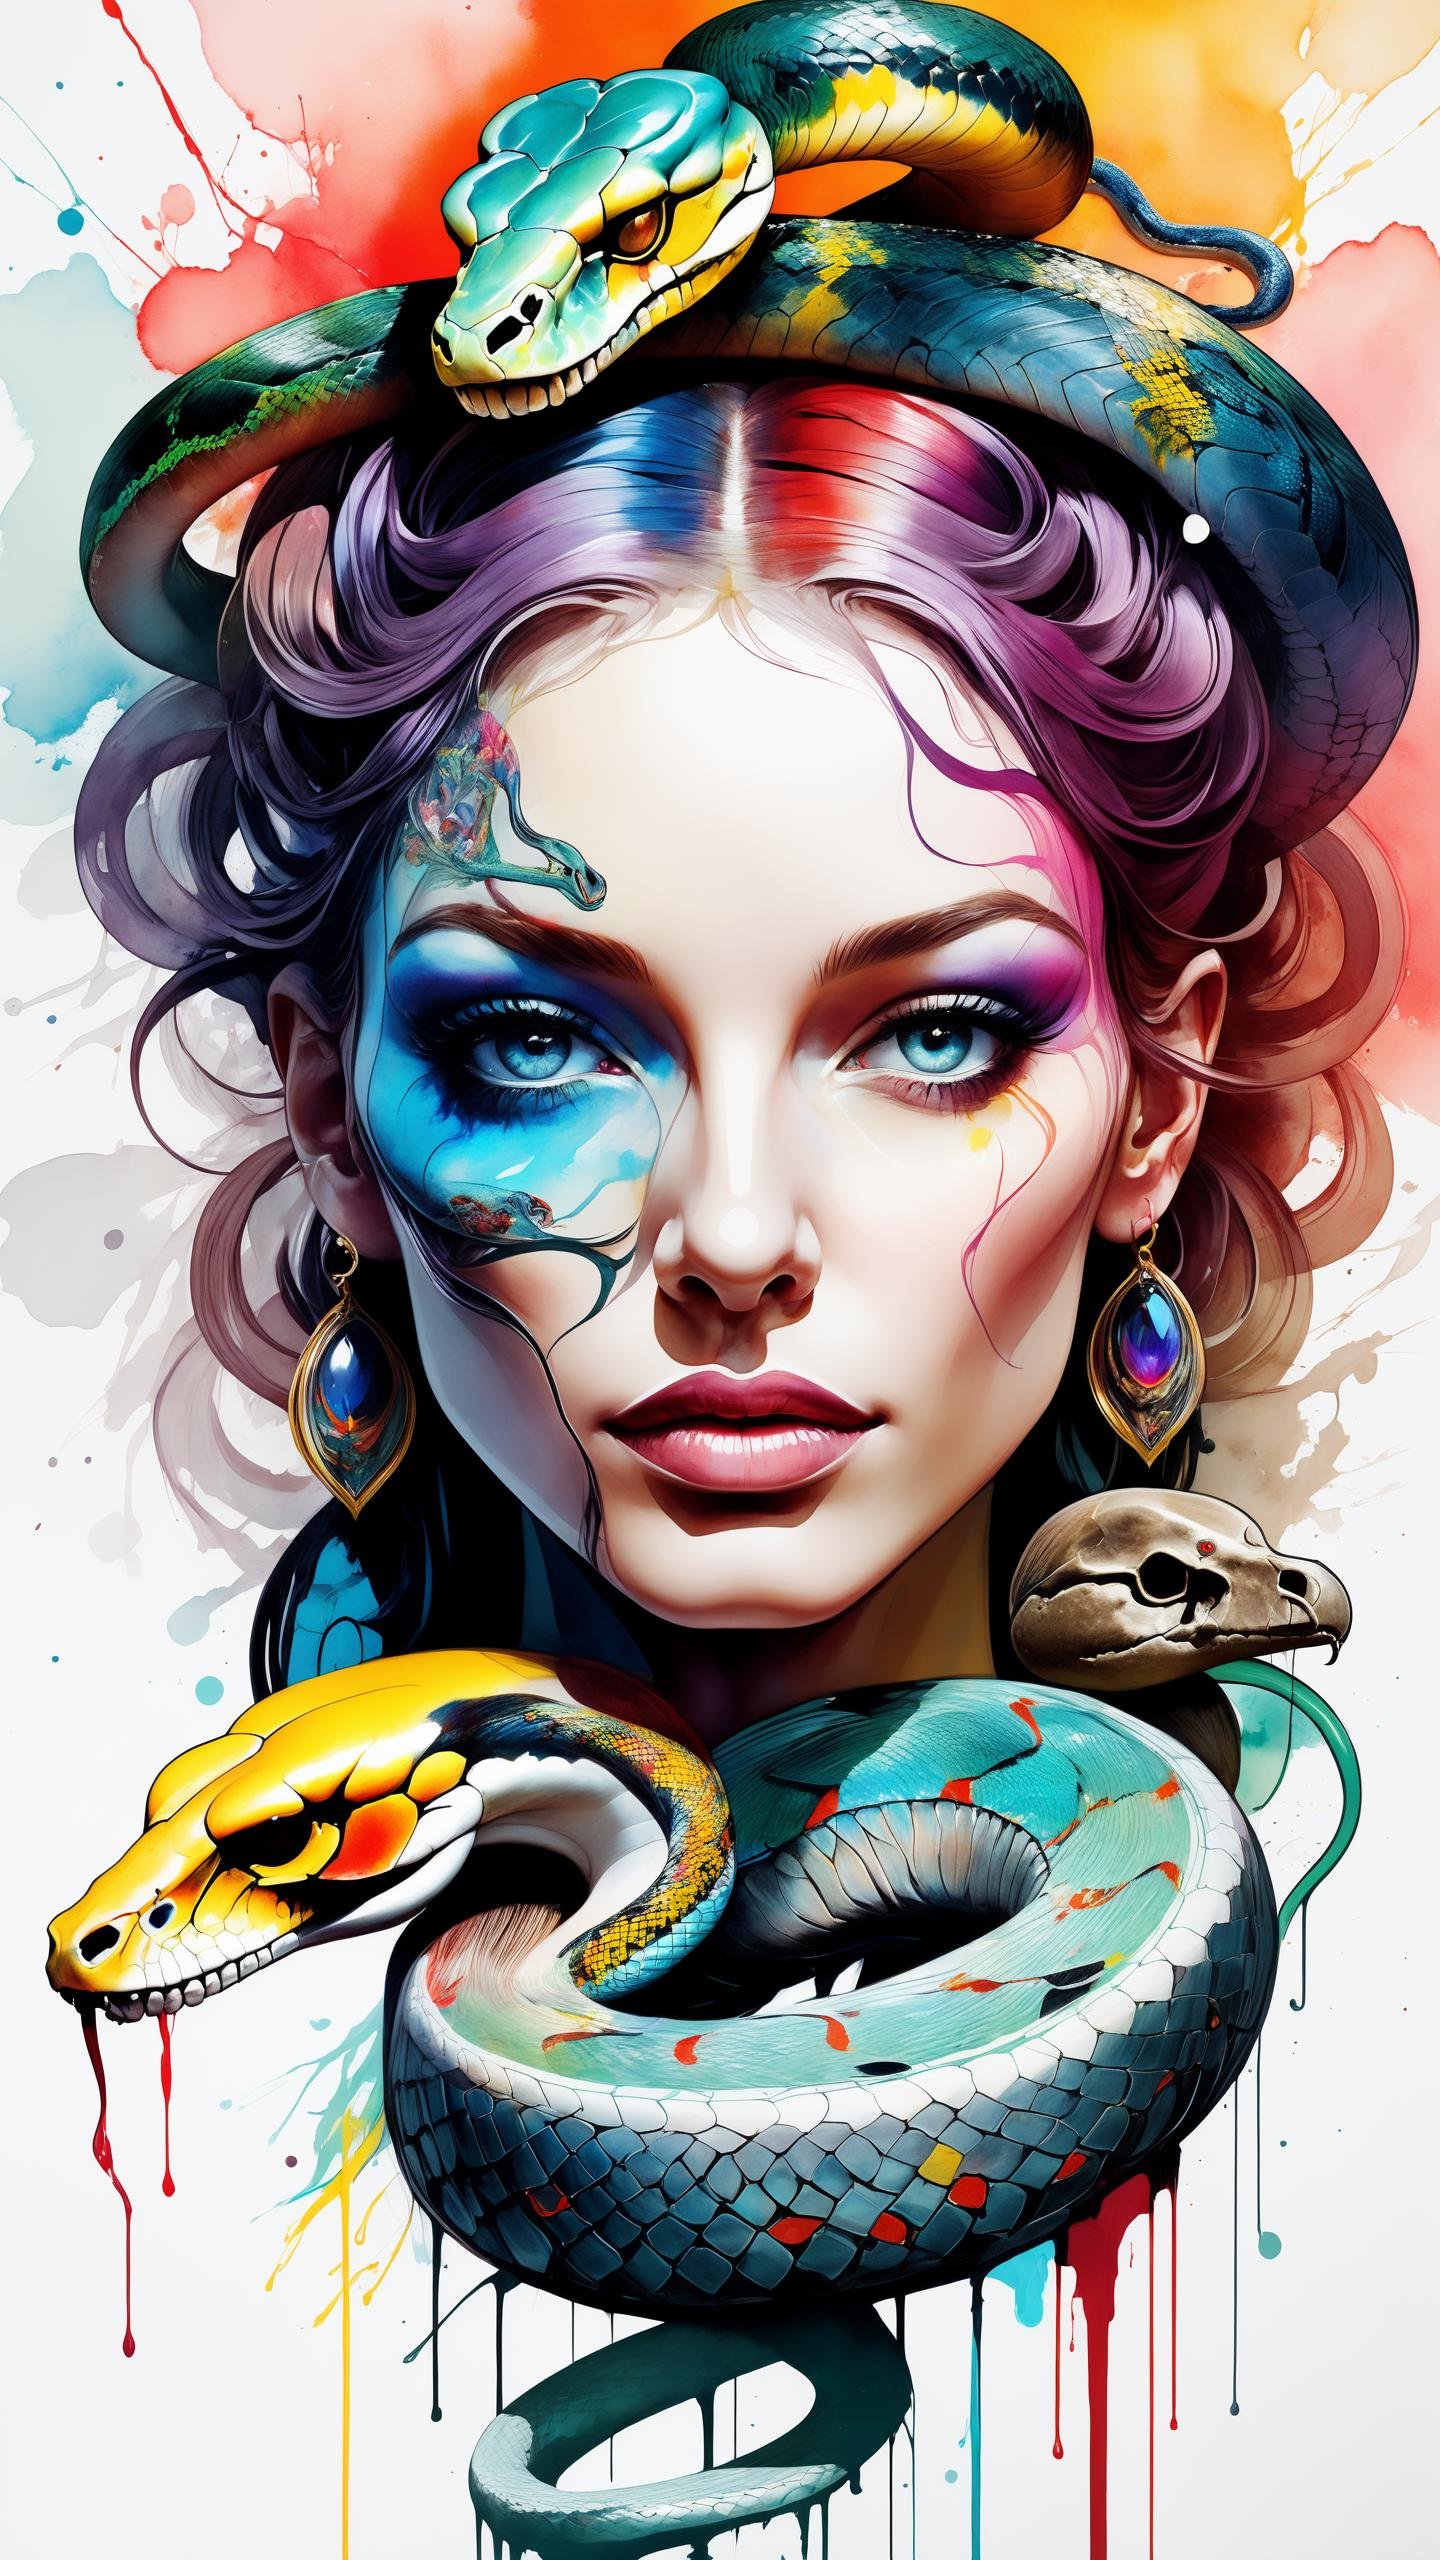 (Gorgeous Painting:1.3) of (Masterpiece:1.3),of (watercolor painting),  (large brain alien head:1.1),(birds:1.2), (body full of skull tattoo:1.3),(snake curling around head:1.4),snakes, (art by Carne Griffiths:1.3),(tertiary color:1.3), (secondary color:1), (primary color:.7), vibrant color, deep shadow, ((Abstract, Abstraction, Artistic, Rim Lights, Rim Lighting, Rim Light, Edge Lighting, absurdres, high resolution, (8k resolution), 8k, 8kres, 8k res, super resolution, ultra hd, megapixel, high details, detailed and intricate, intricate details, high intricate details, absurd amount of details)), (by Artist Alberto Seveso:1.4),(by Artist Conrad Roset:1.4),(by Artist Ivan Bilibin:1.3),(Process Art:1.8)  style of kaleidoscope art